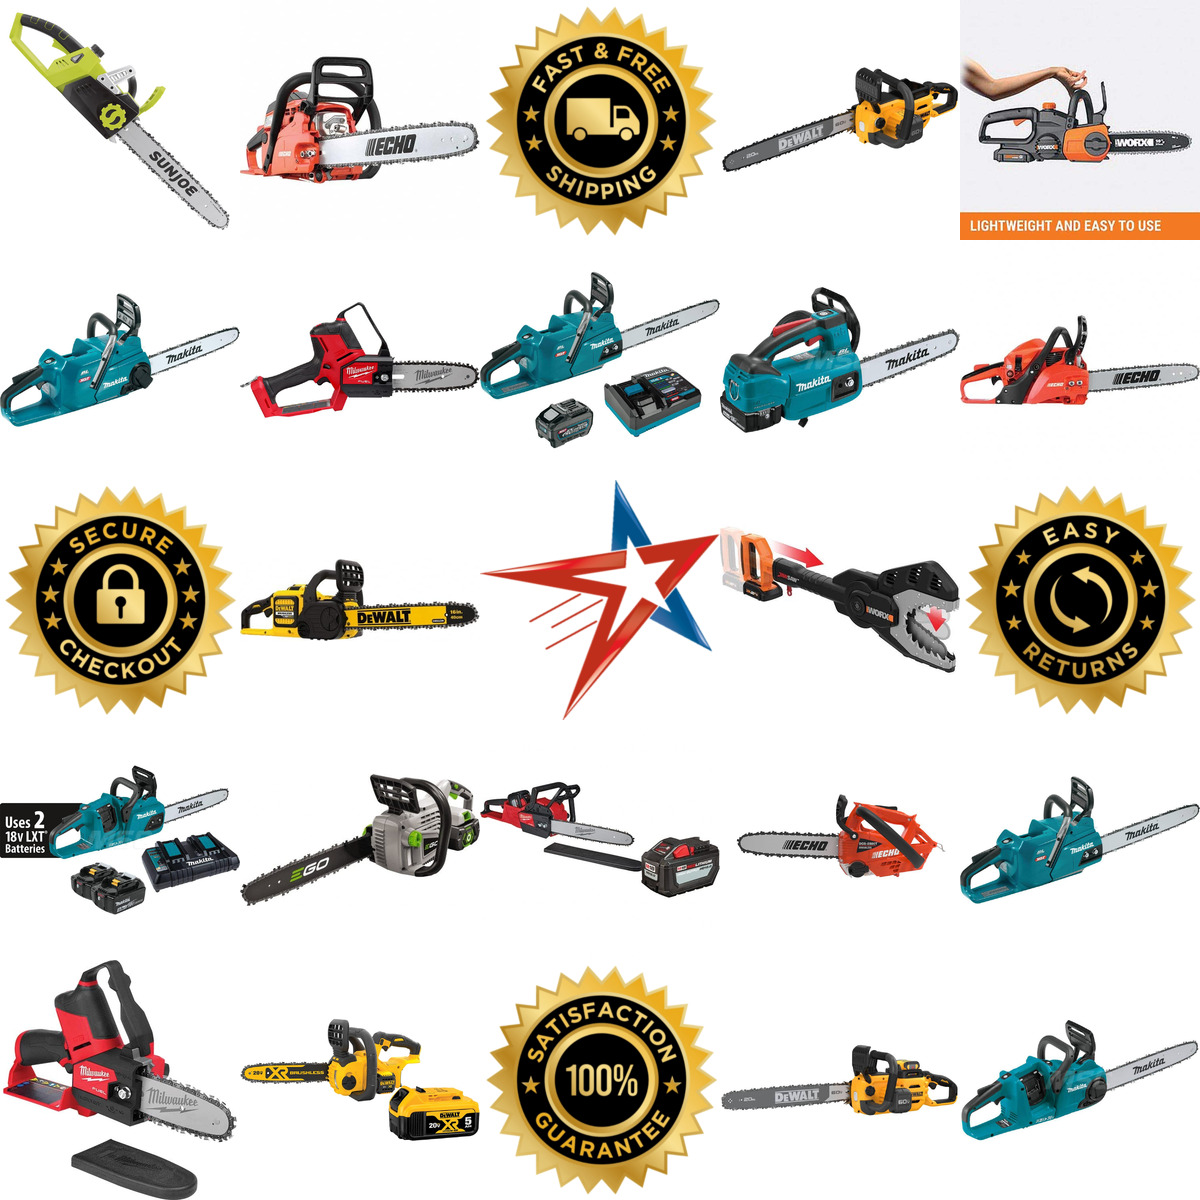 A selection of Chainsaws products on GoVets